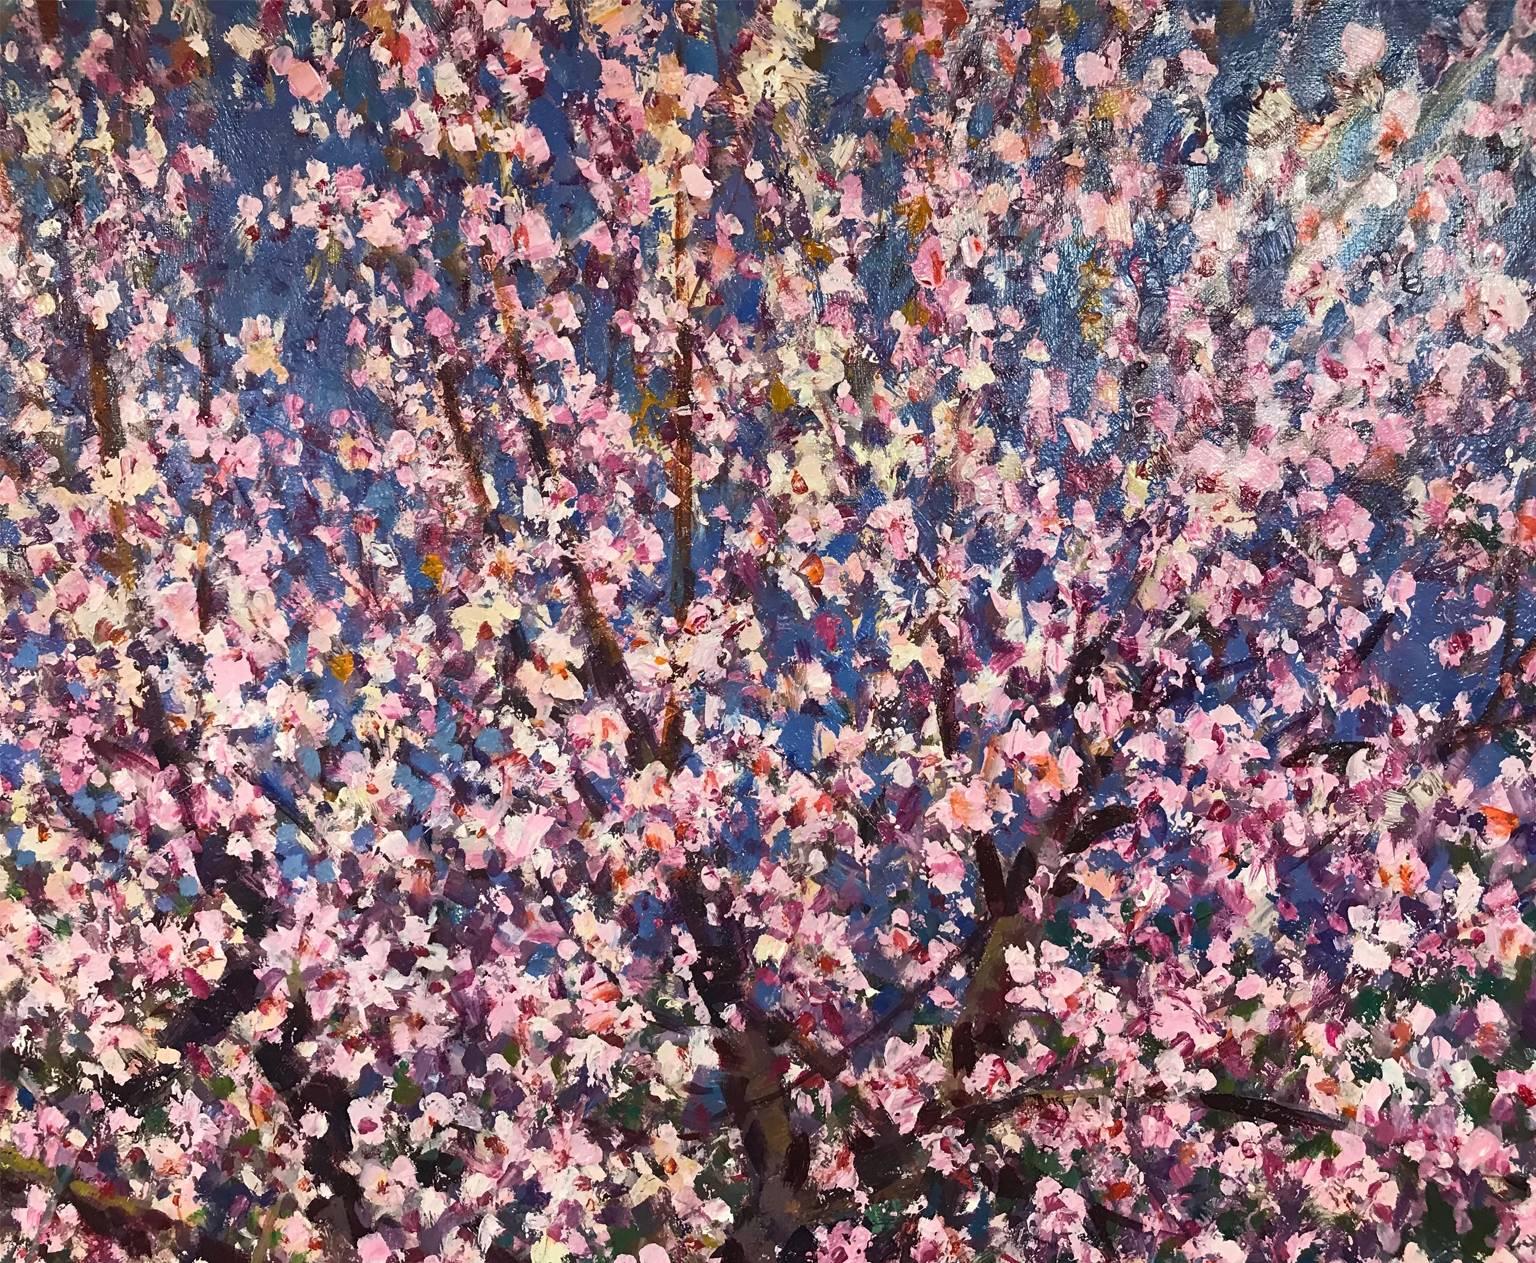 LANDSCAPE, ALMOND TREE FLOWERED. - Painting by Francisco Calabuig